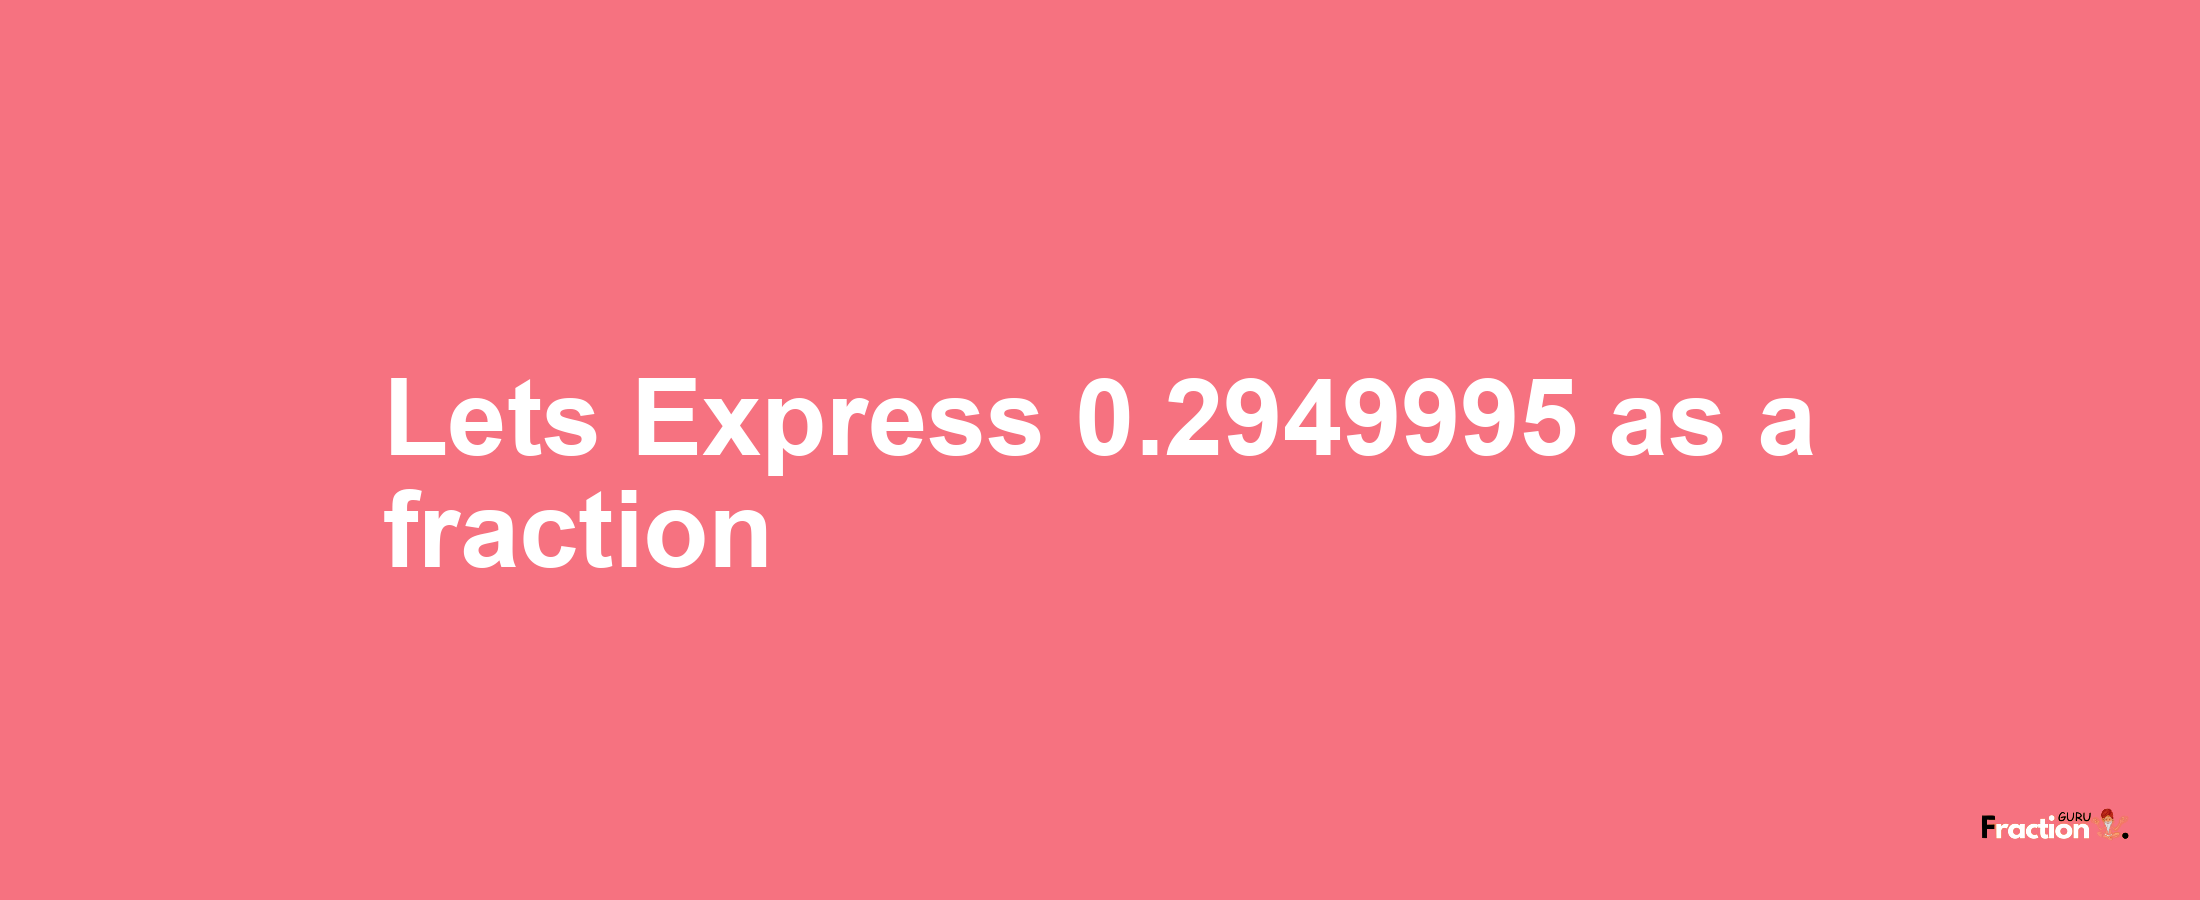 Lets Express 0.2949995 as afraction